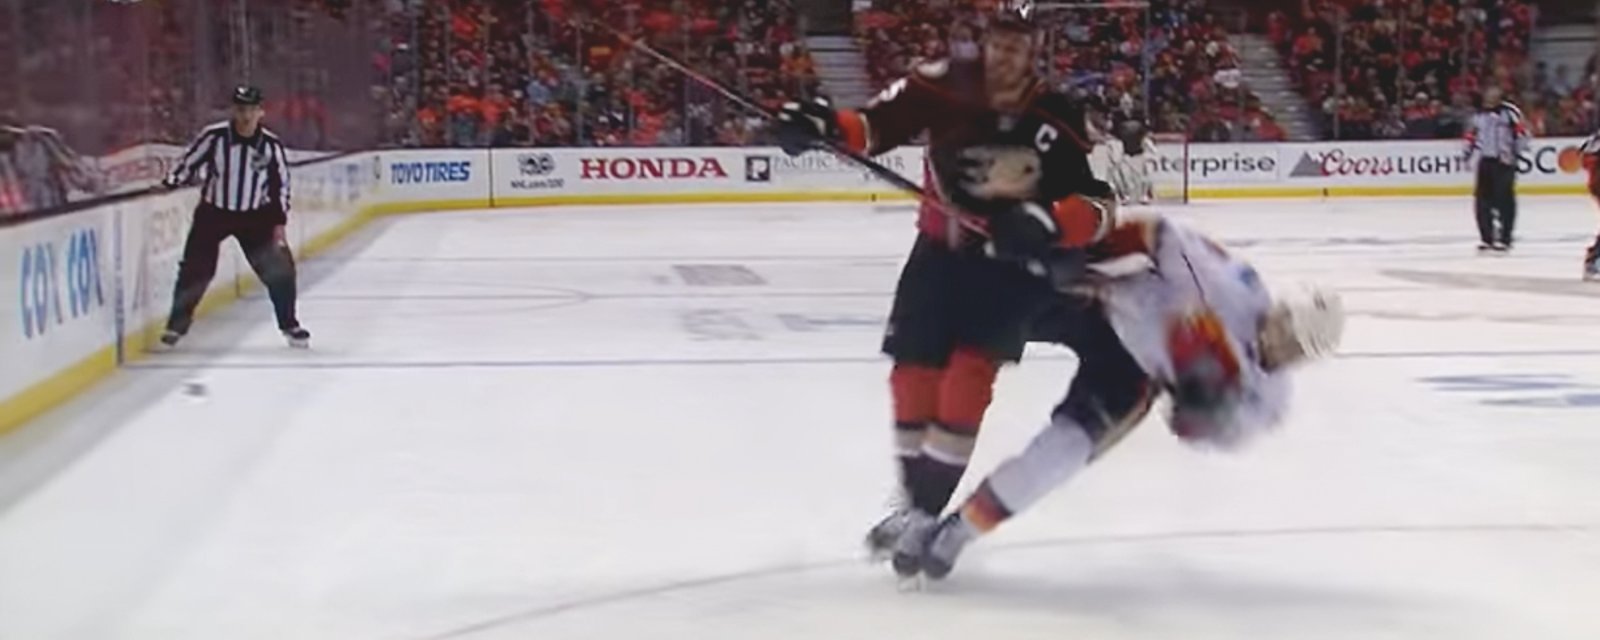 MUST SEE: Ryan Getzlaf DESTROYS Mark Giordano, Flames get a penalty.